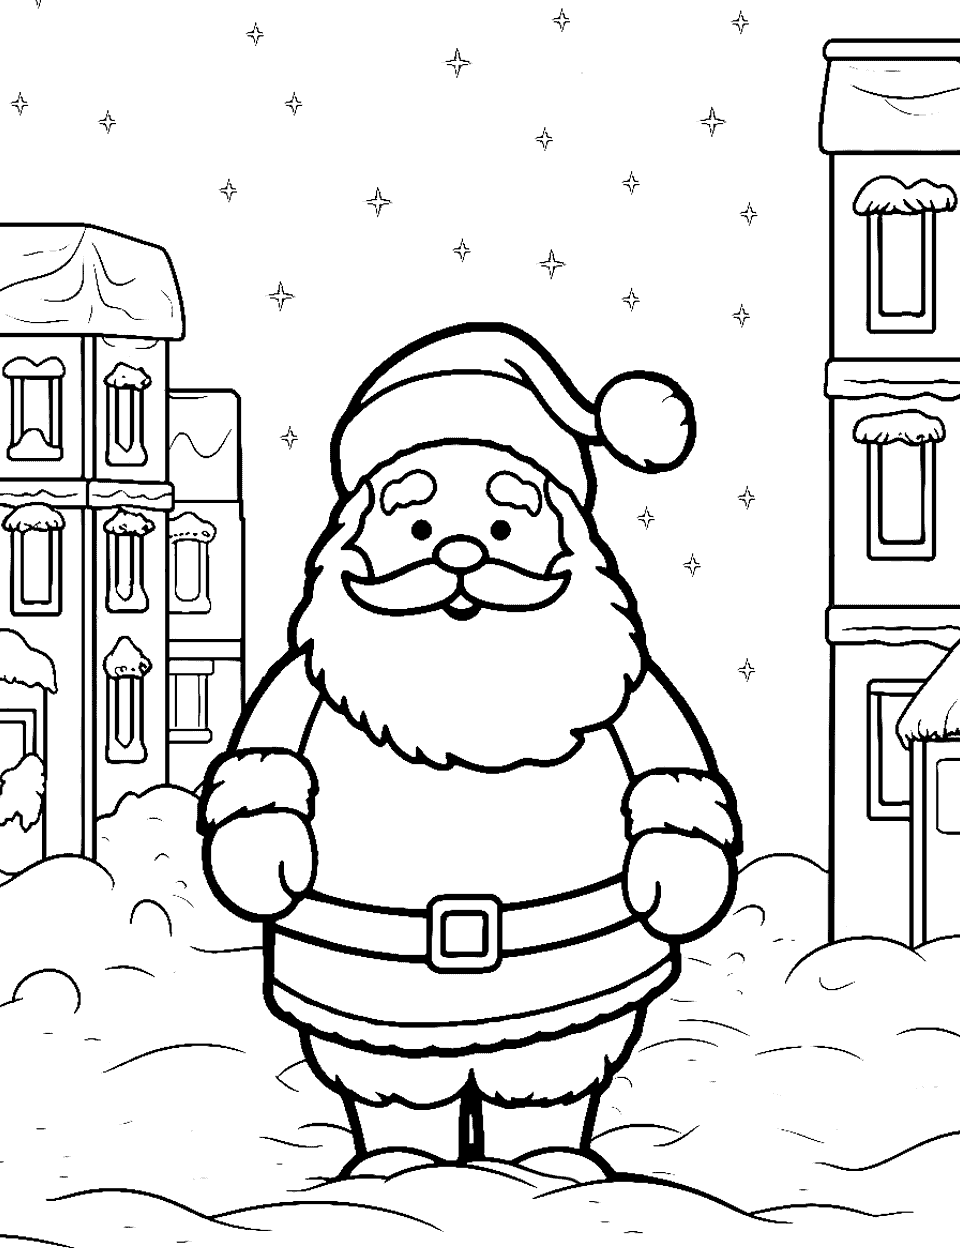 Santa in the City Coloring Page - Saint Nick standing in a snowy city street, with streetlights and snow-covered buildings.